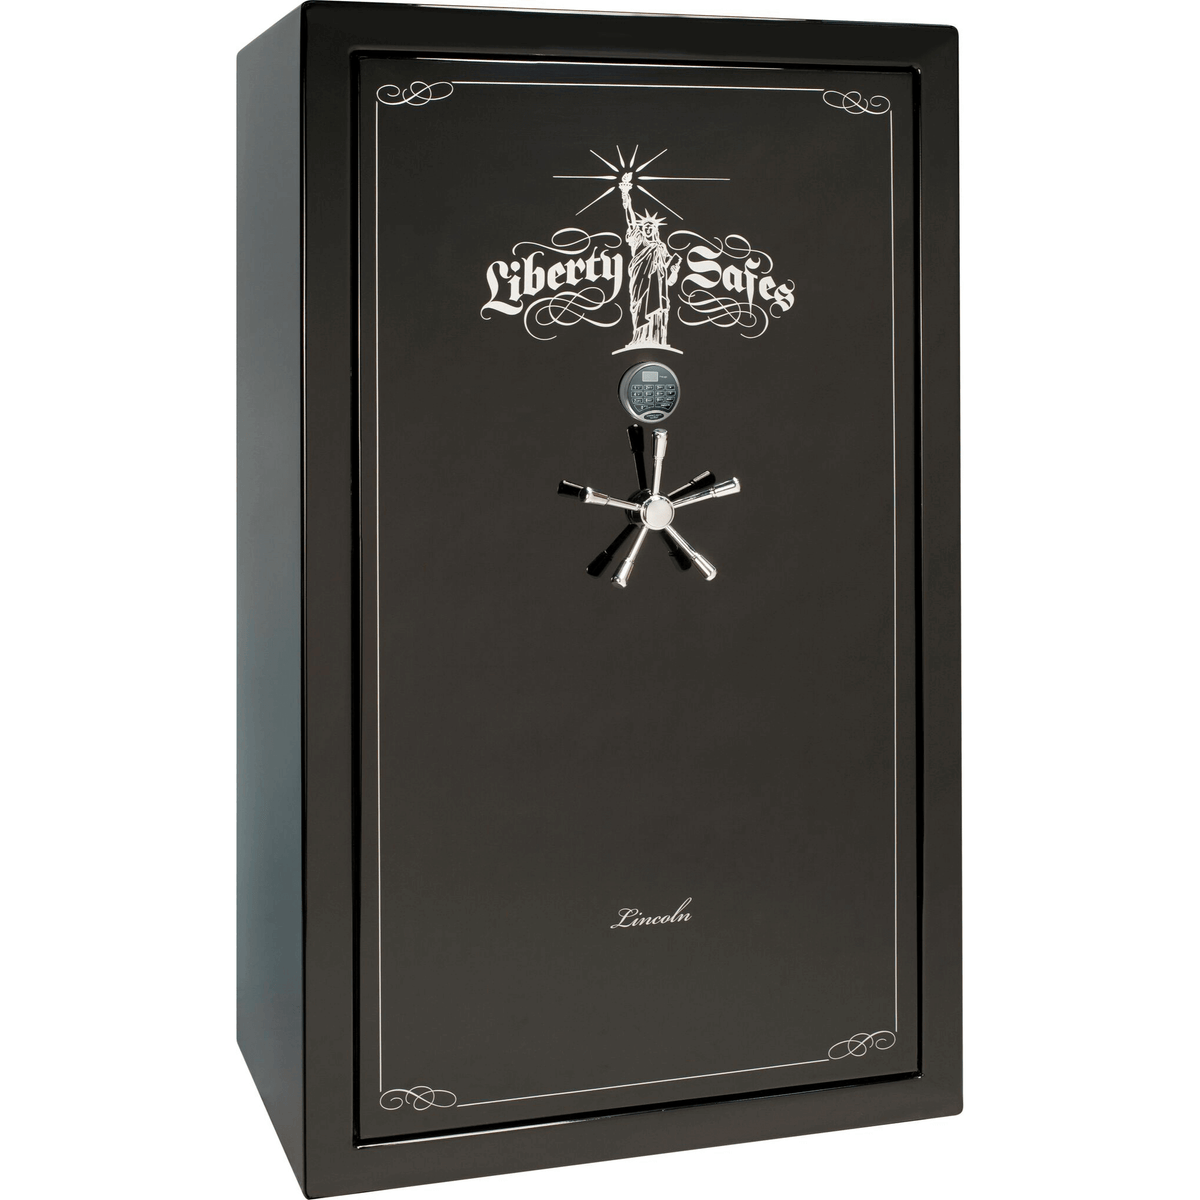 Liberty Lincoln 50 Safe in Black Gloss with Chrome Electronic Lock.